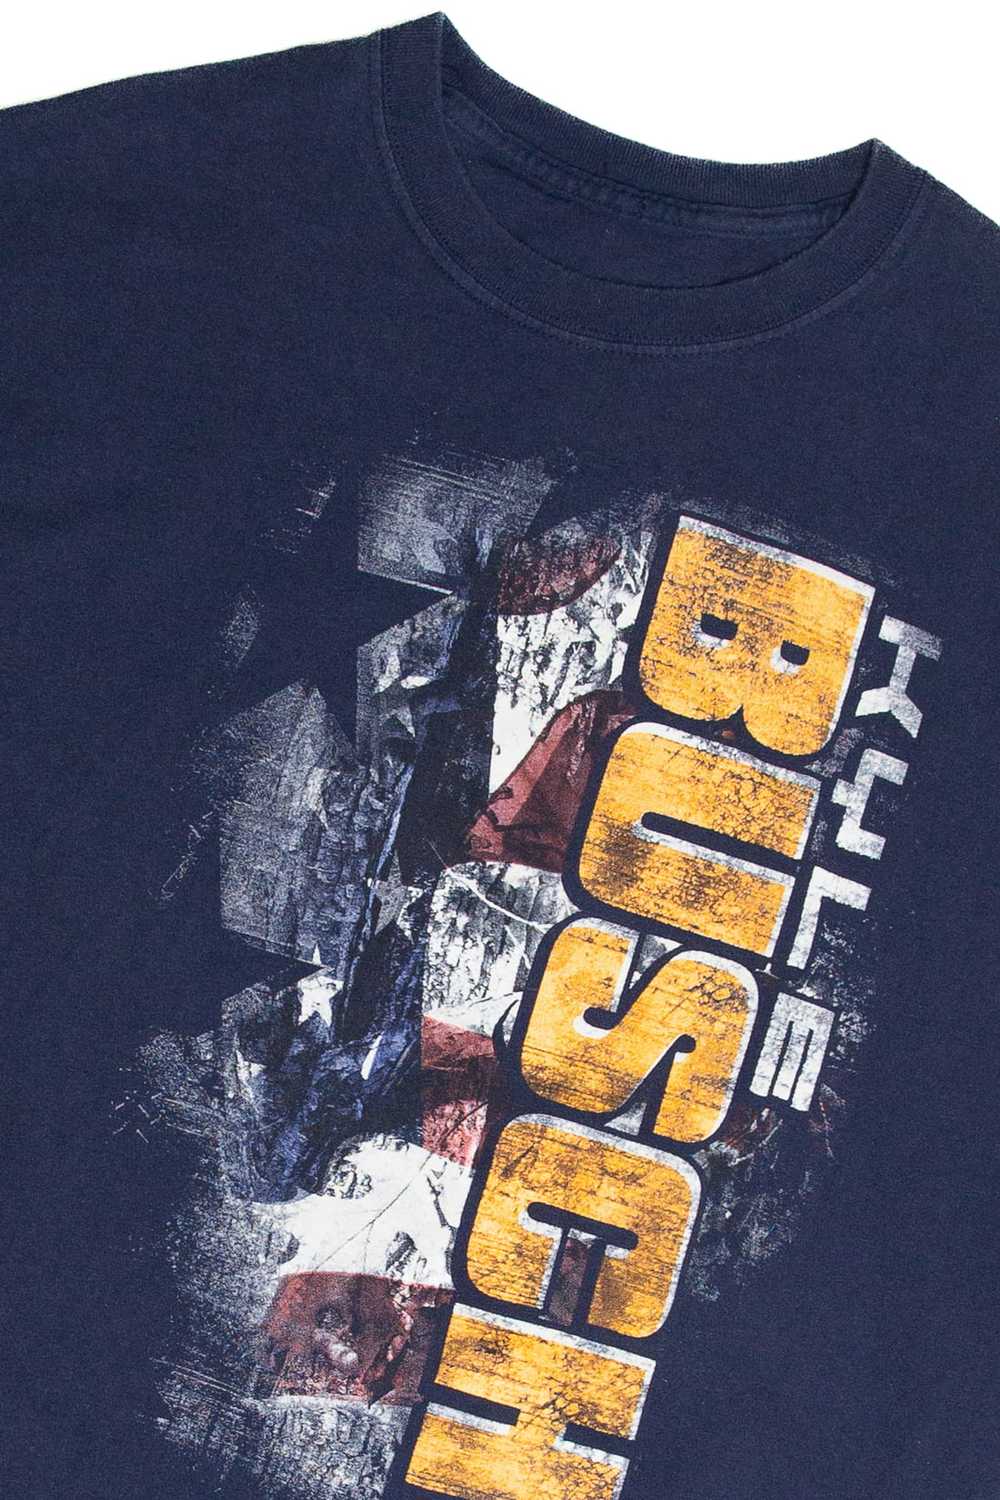 Recycled Kyle Busch Nascar T-Shirt - image 3